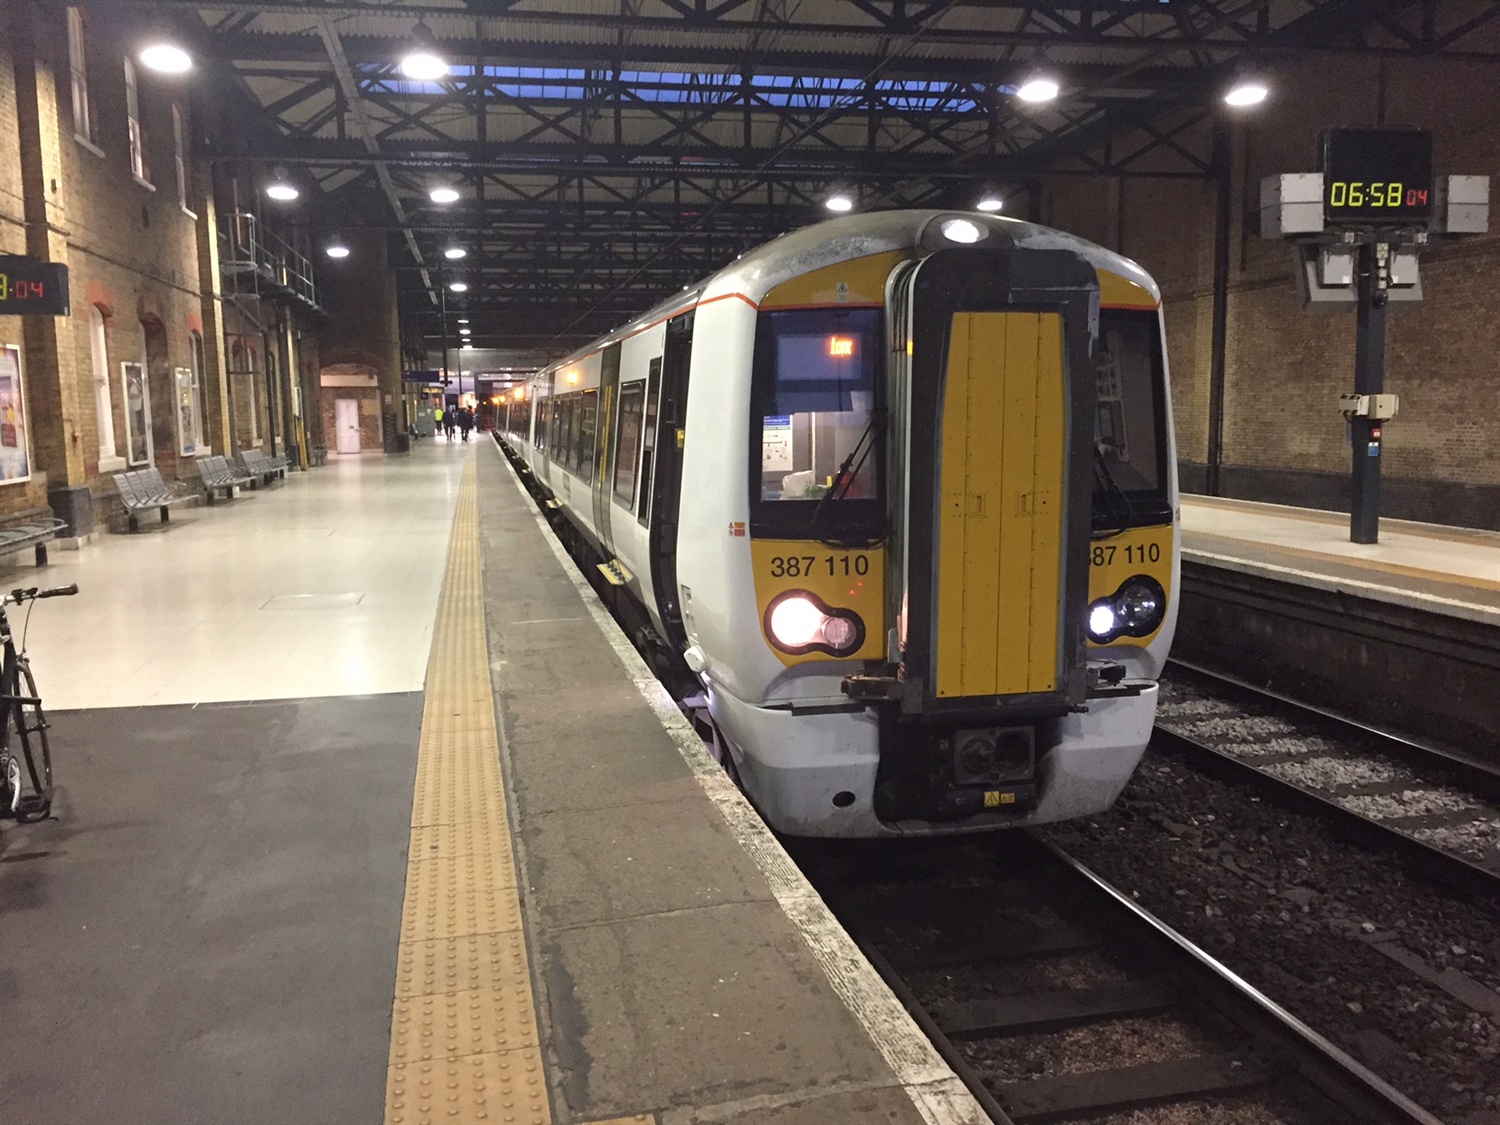 First Class 387-1 enters service on Great Northern